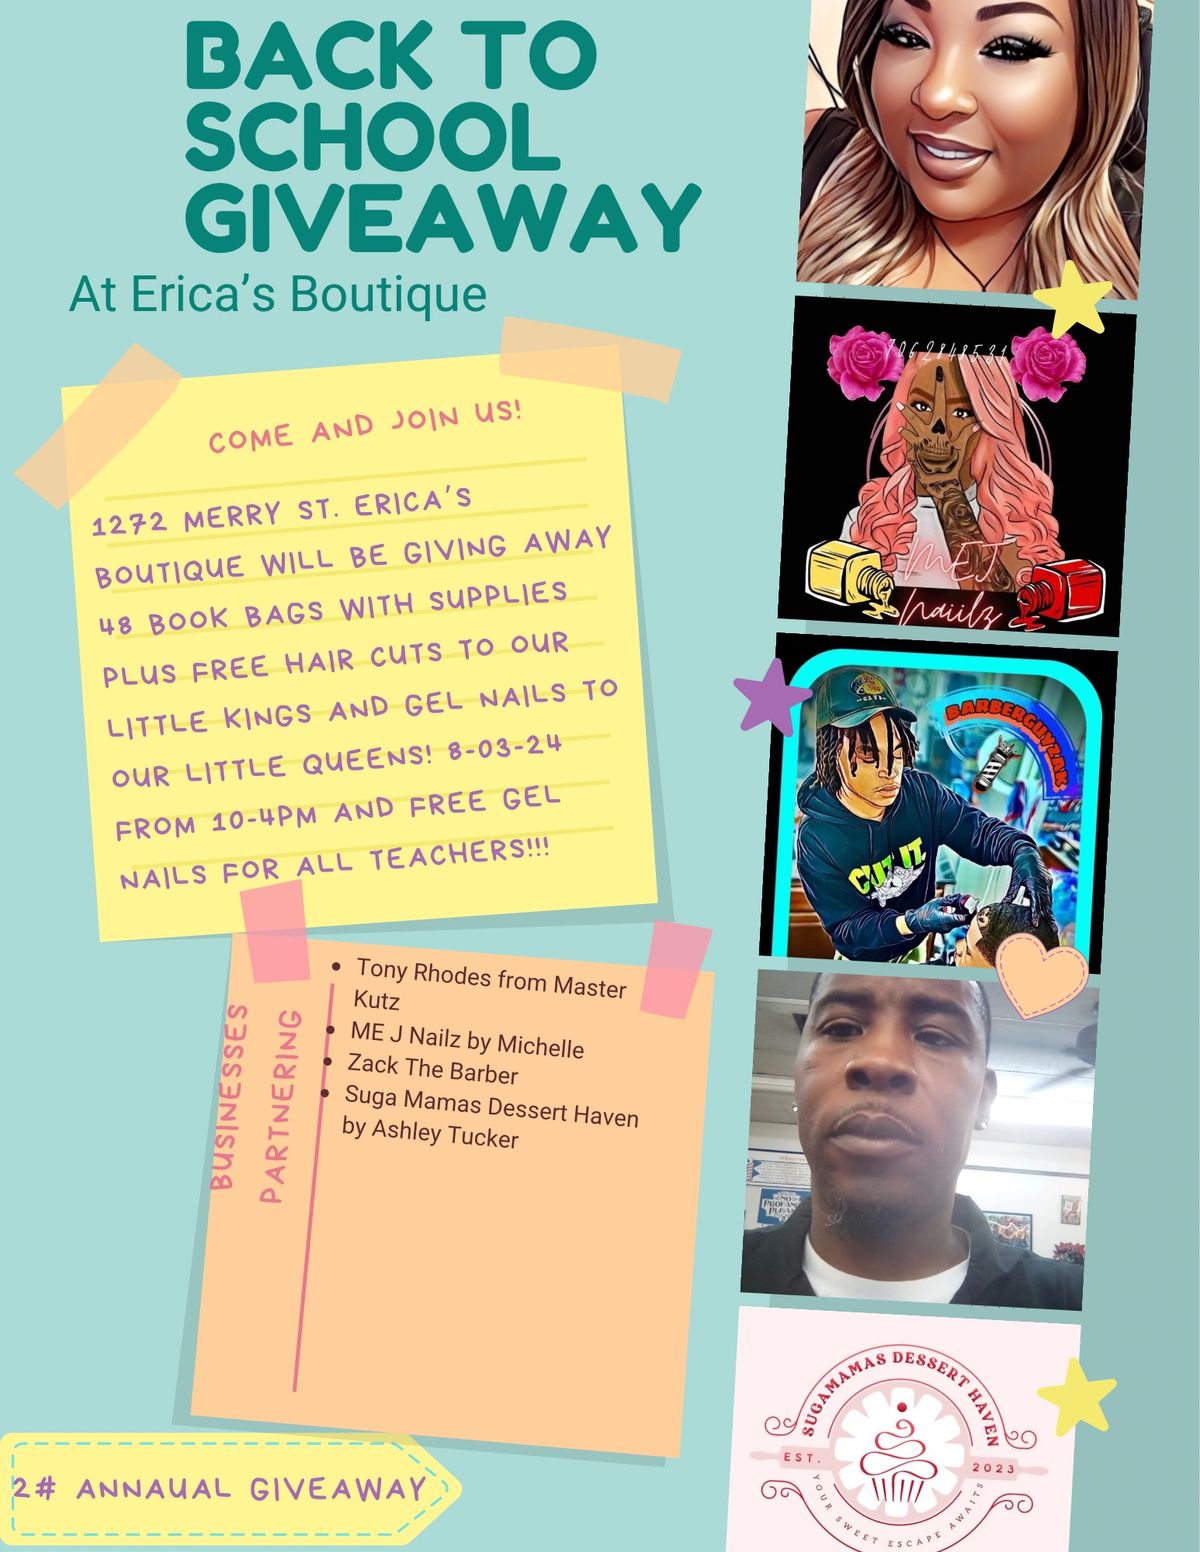 Erica's Boutique's 2nd Annual Book Bag Giveaway